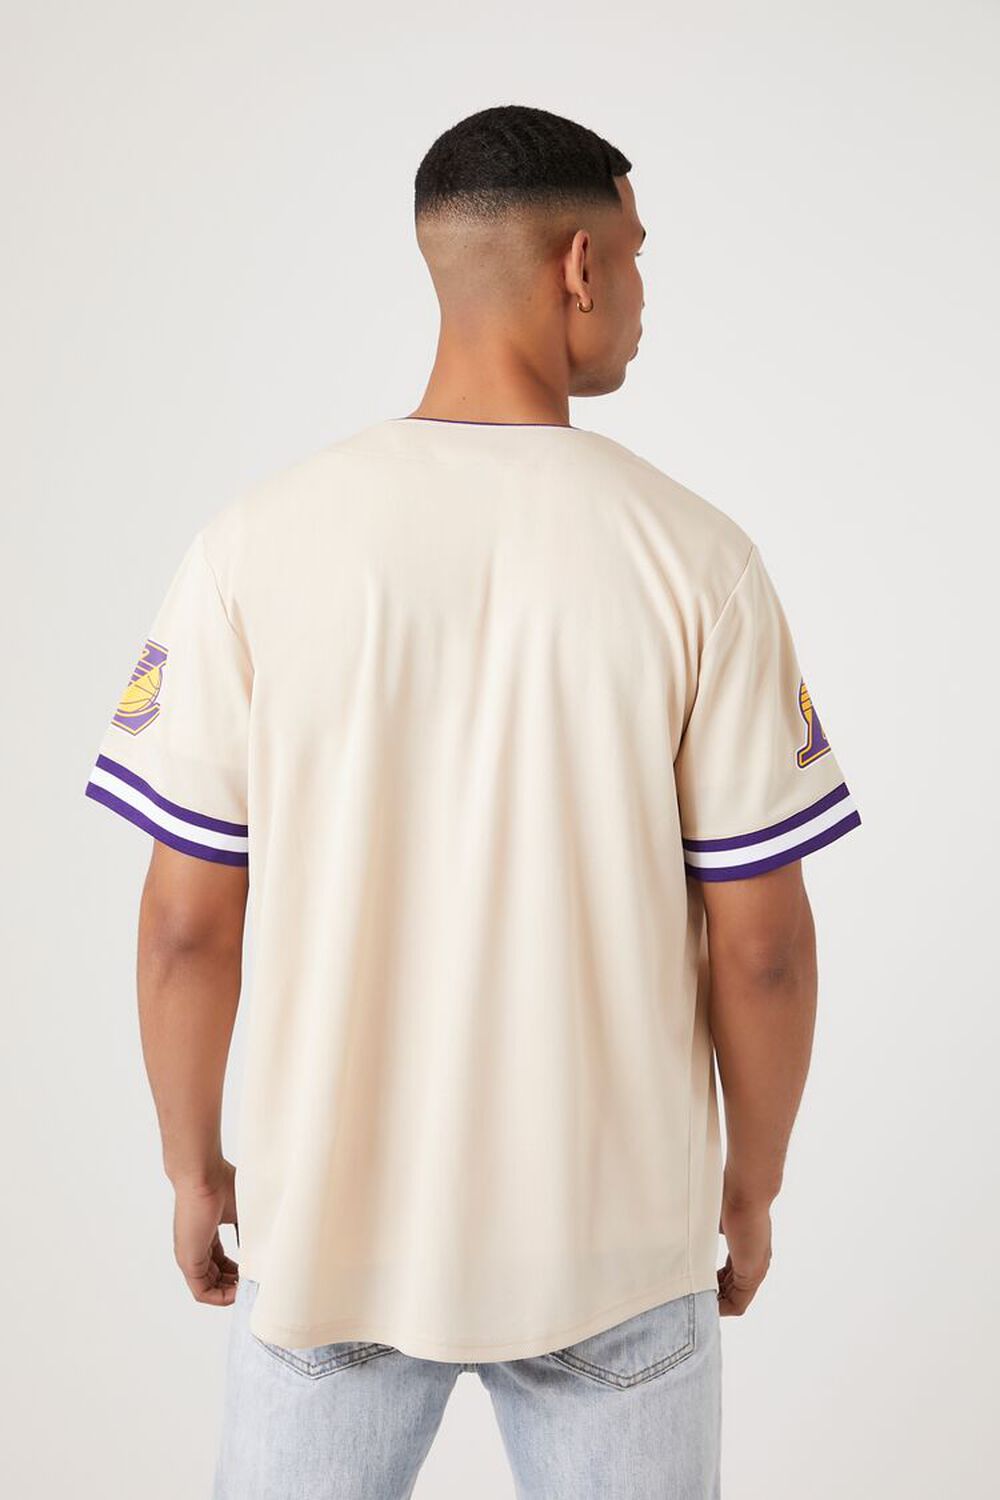 TAUPE/MULTI Embroidered Los Angeles Lakers Jersey, image 3